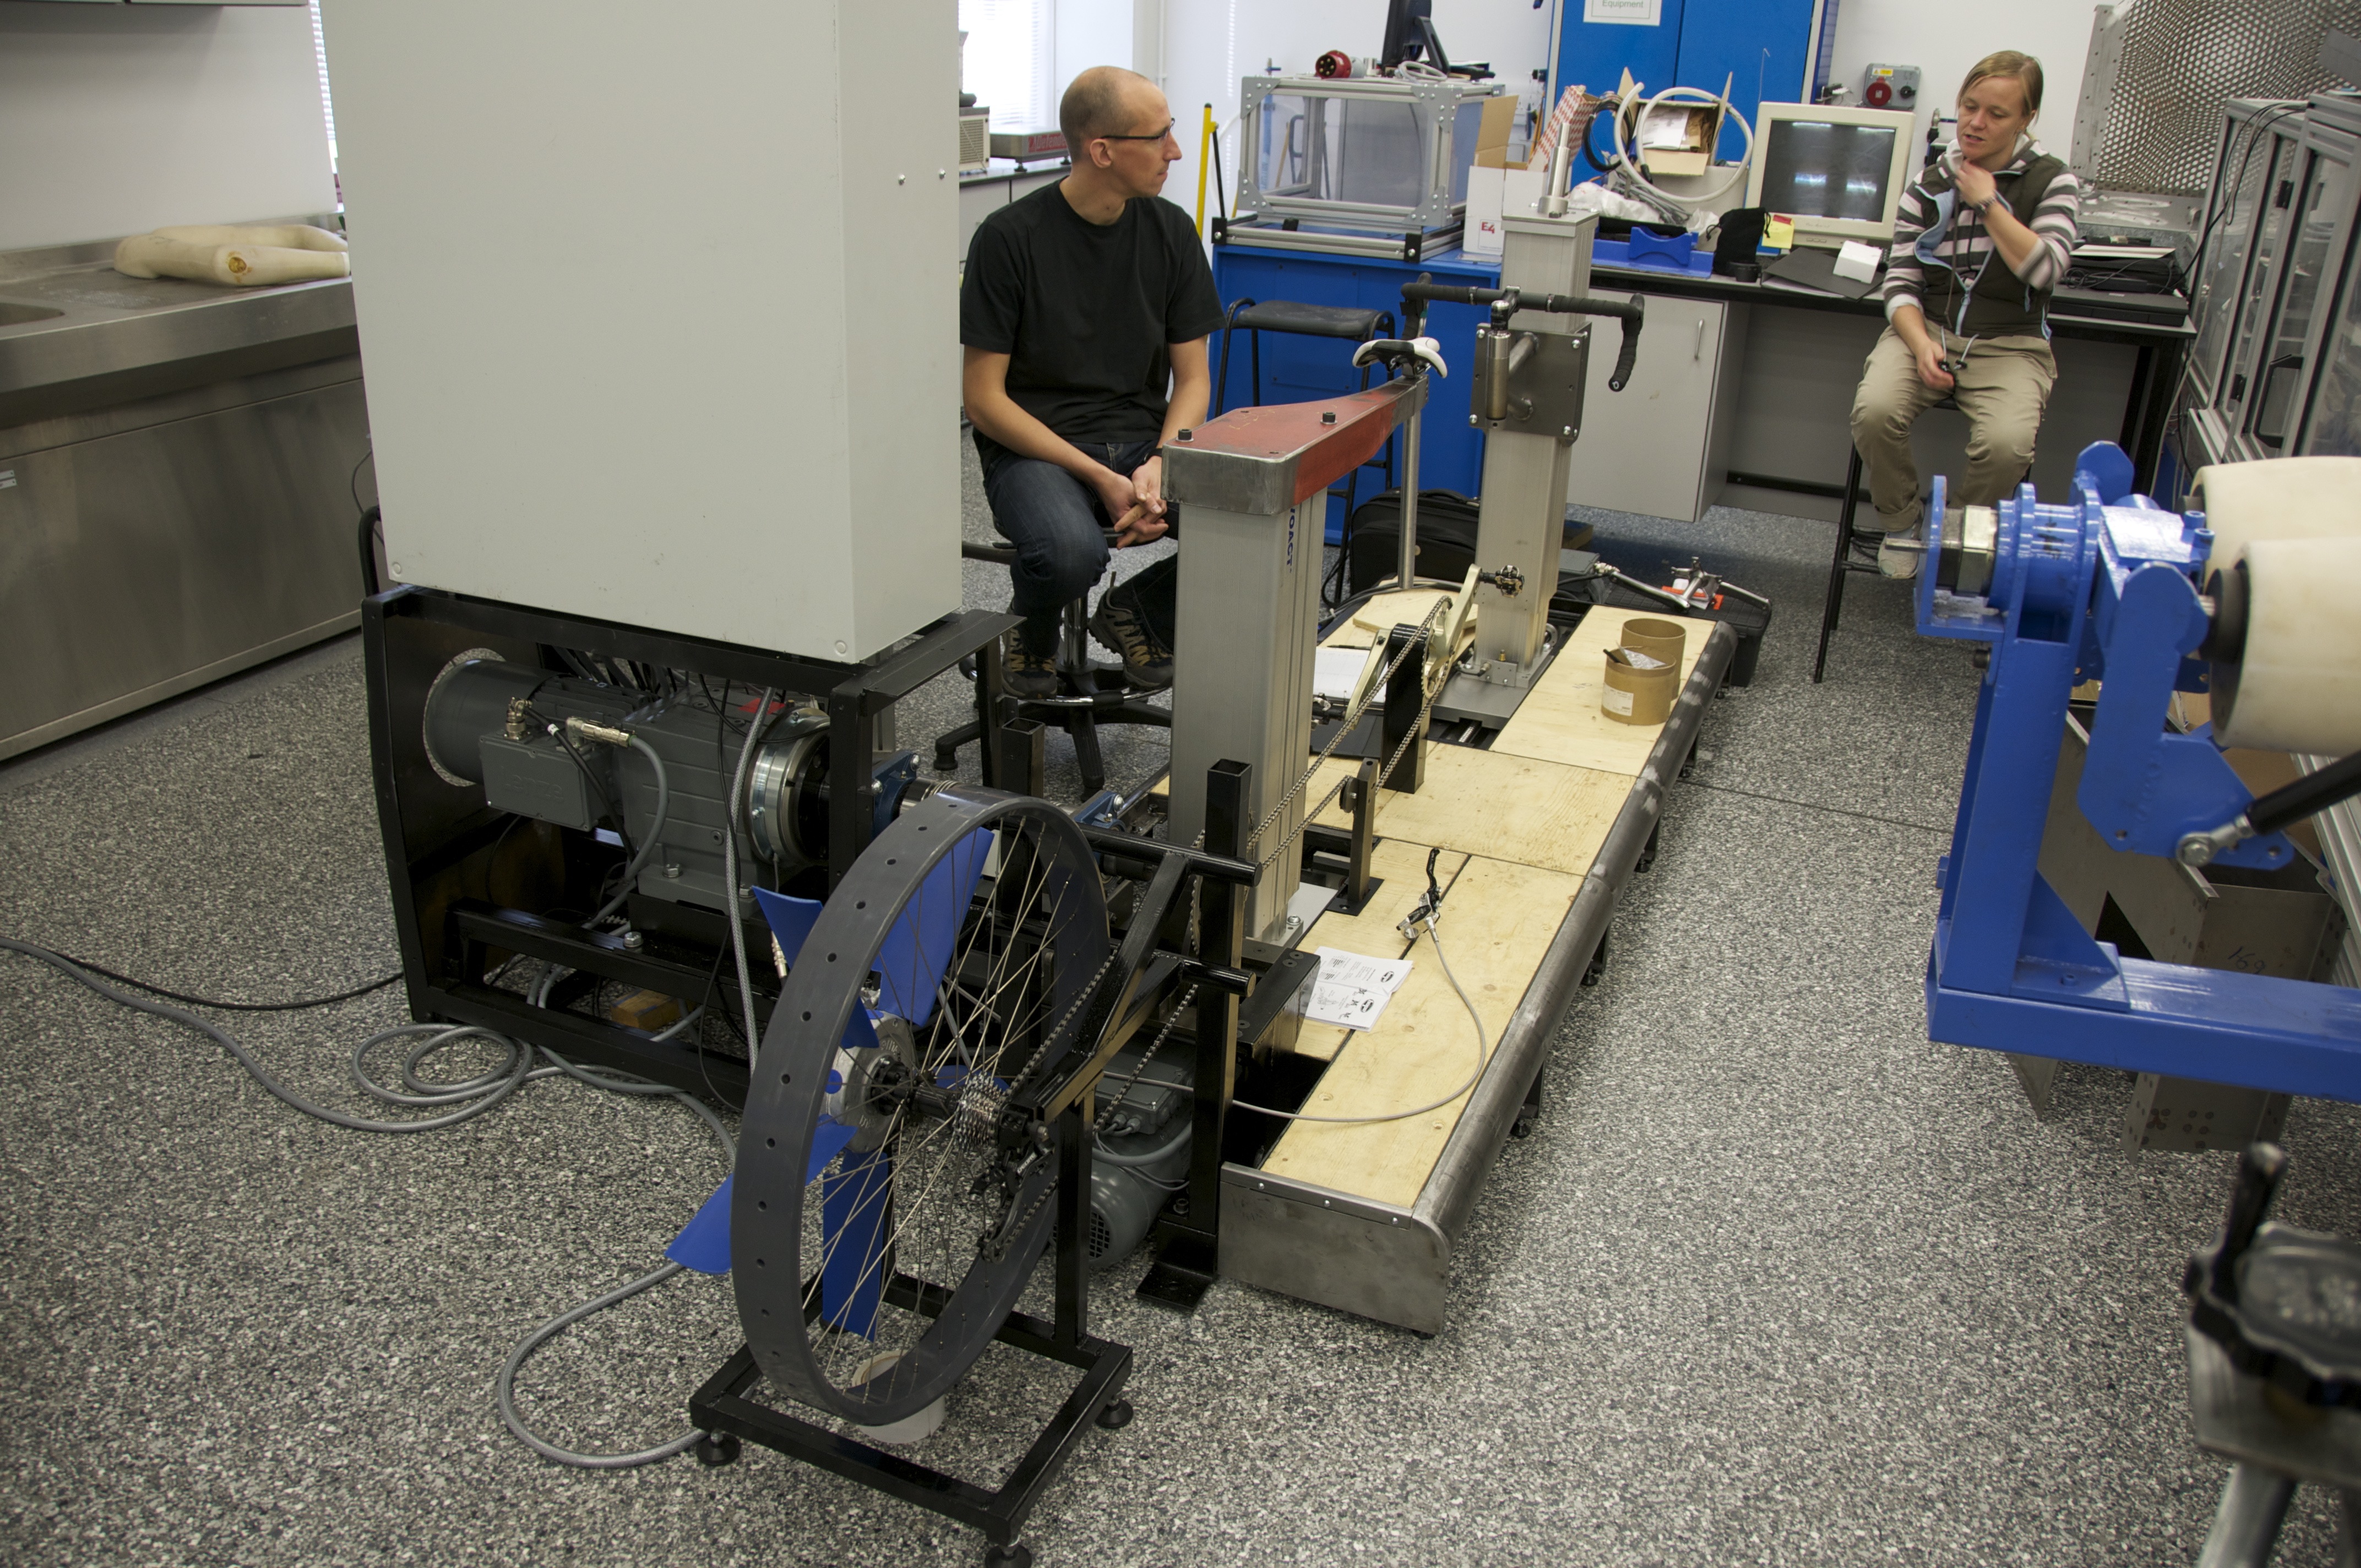 two researchers discussing the ergometer in the testing facility